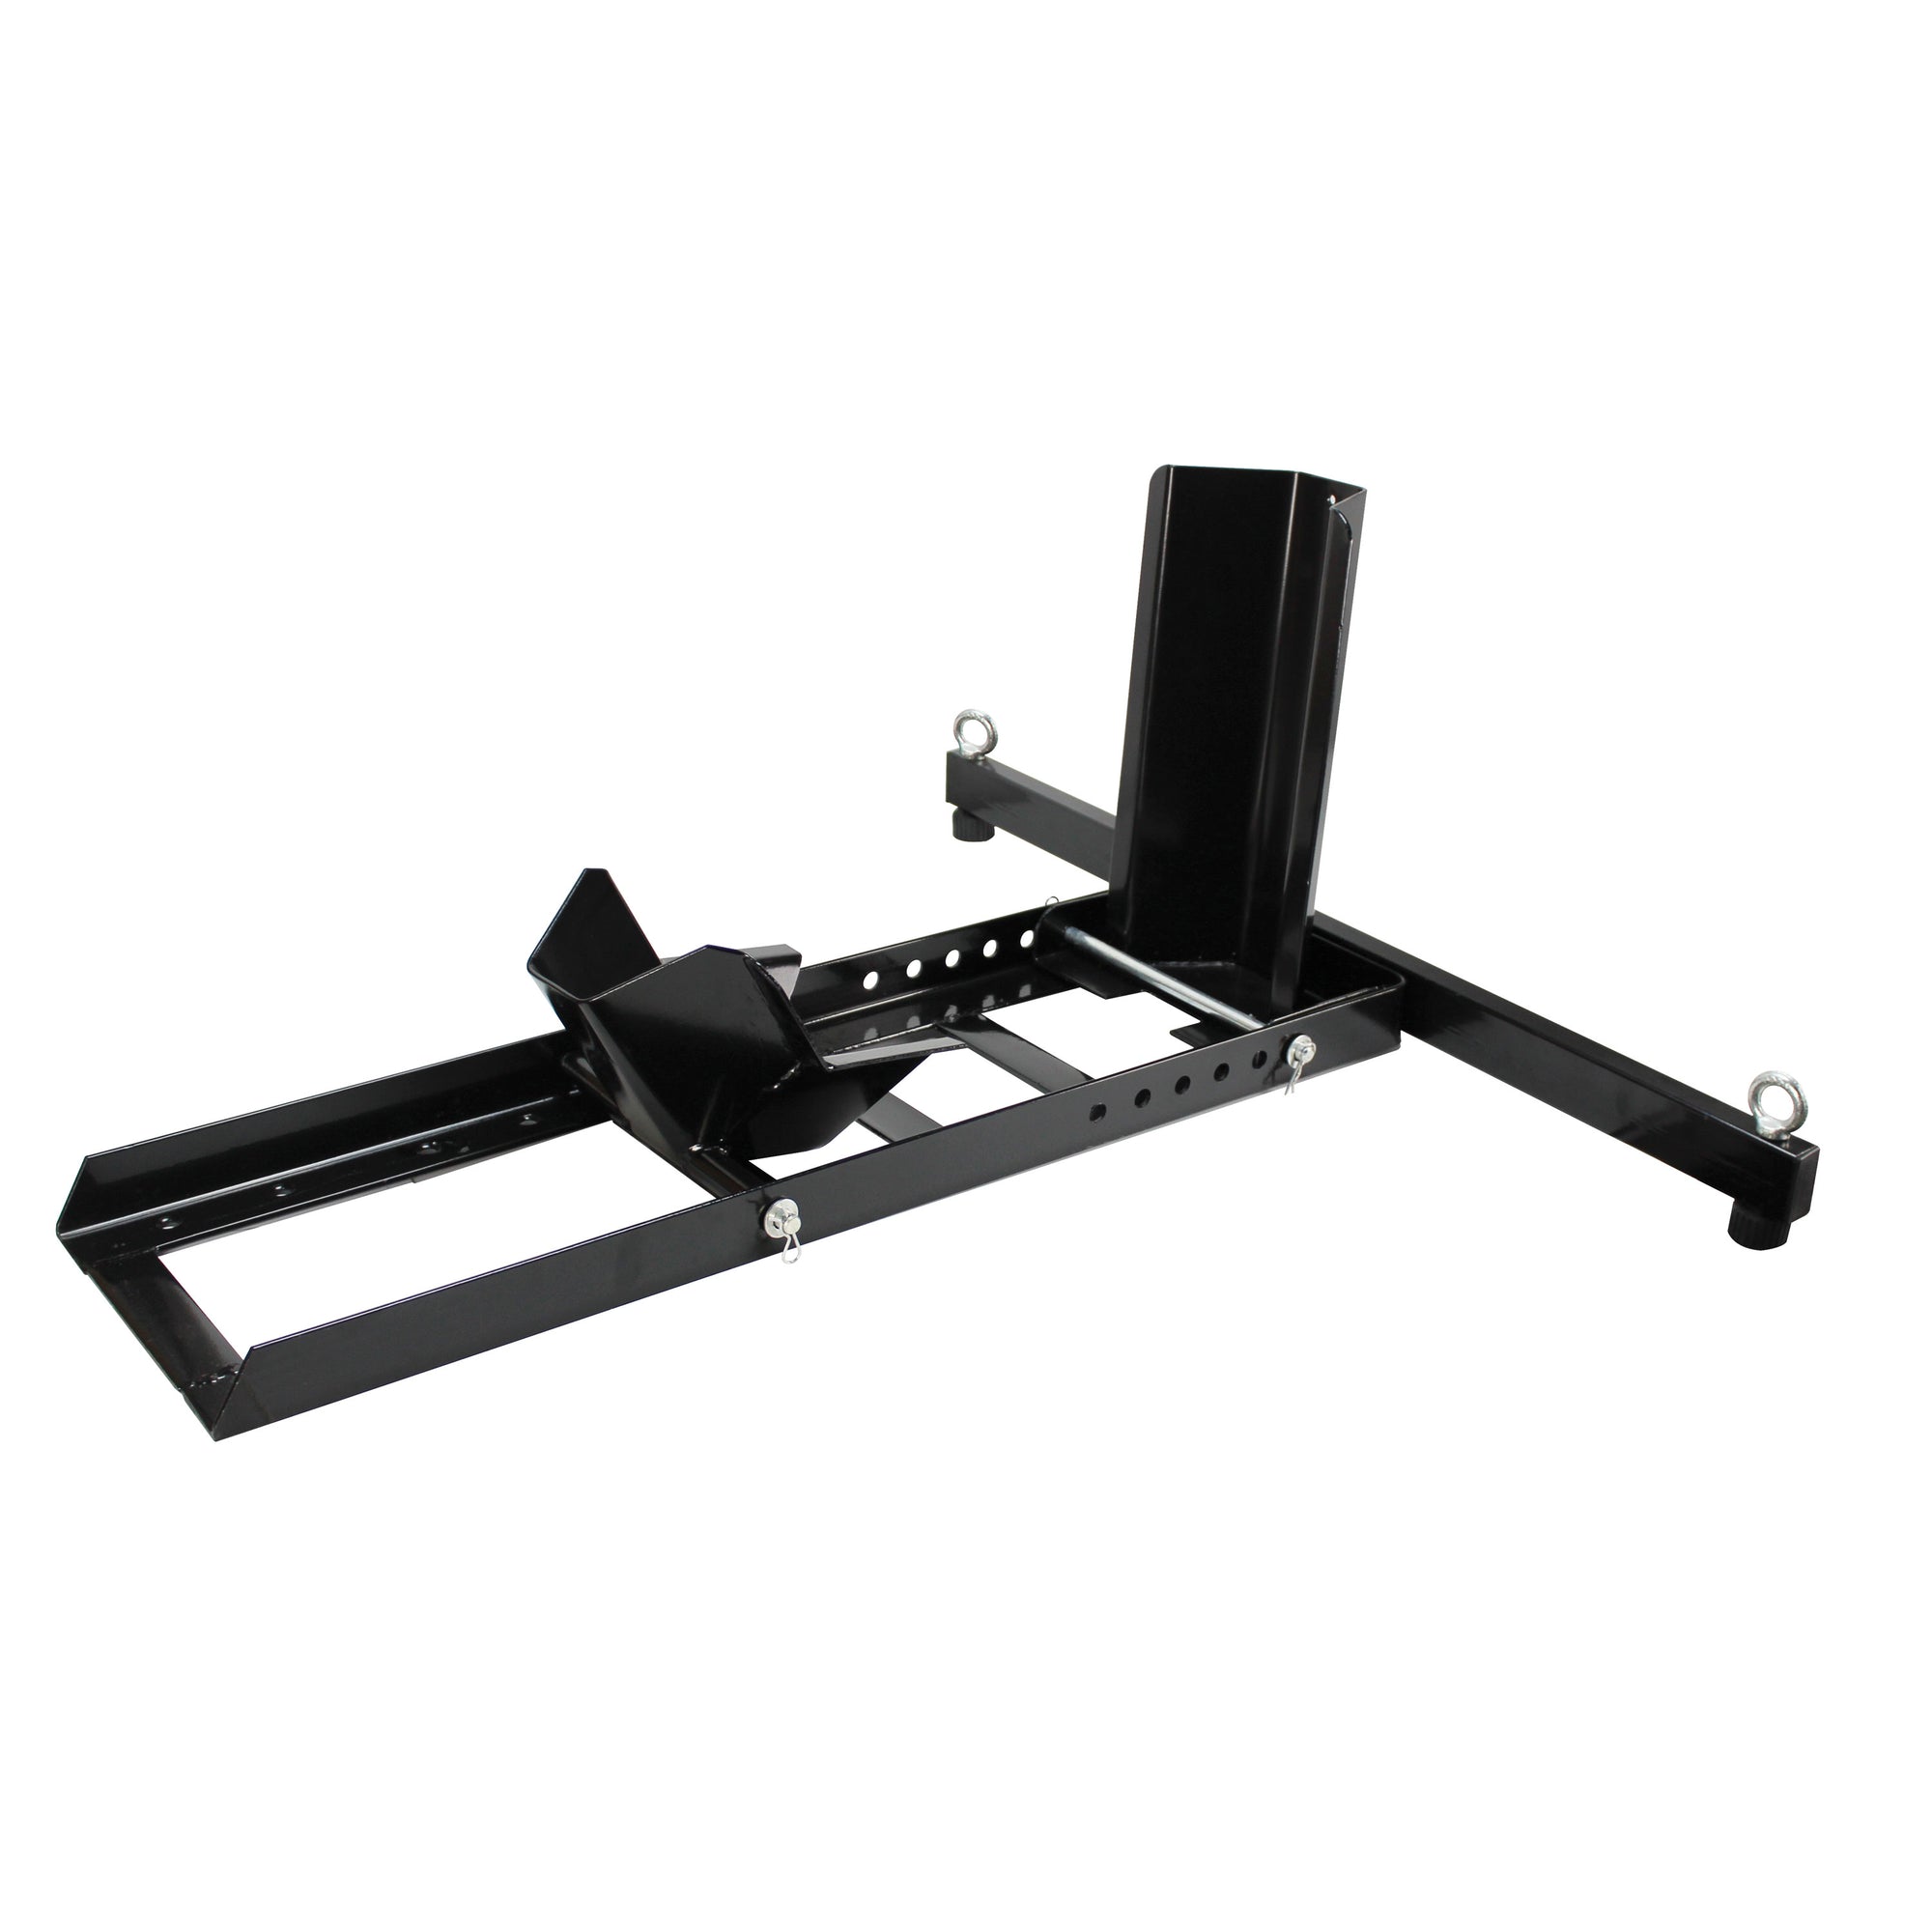 Extreme Max 5001.5757 Heavy-Duty Adjustable Motorcycle Wheel Chock Stand - 1800 lb. Weight Capacity